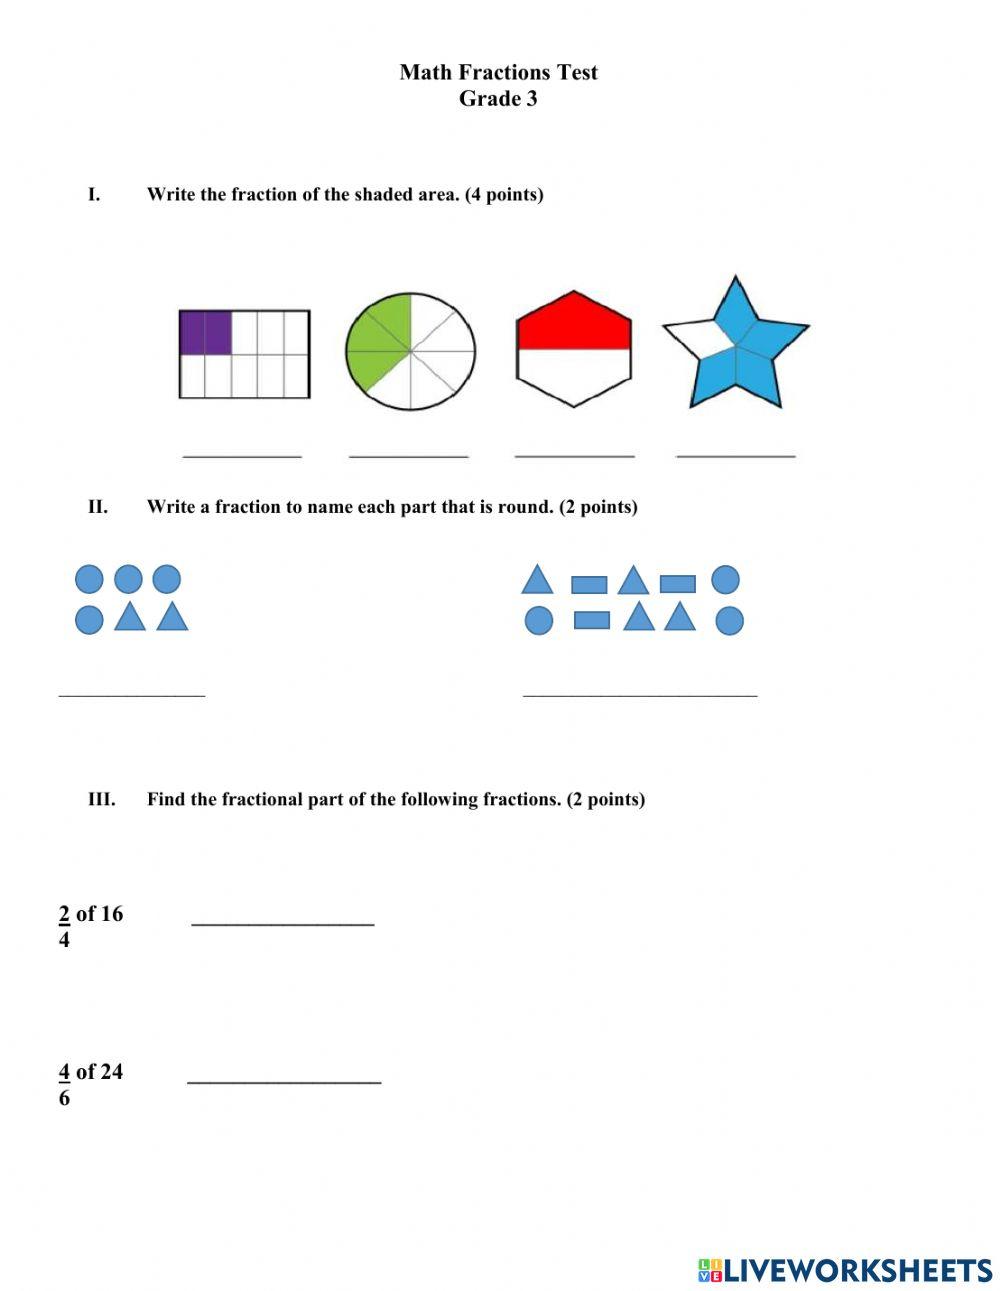 Fractions test